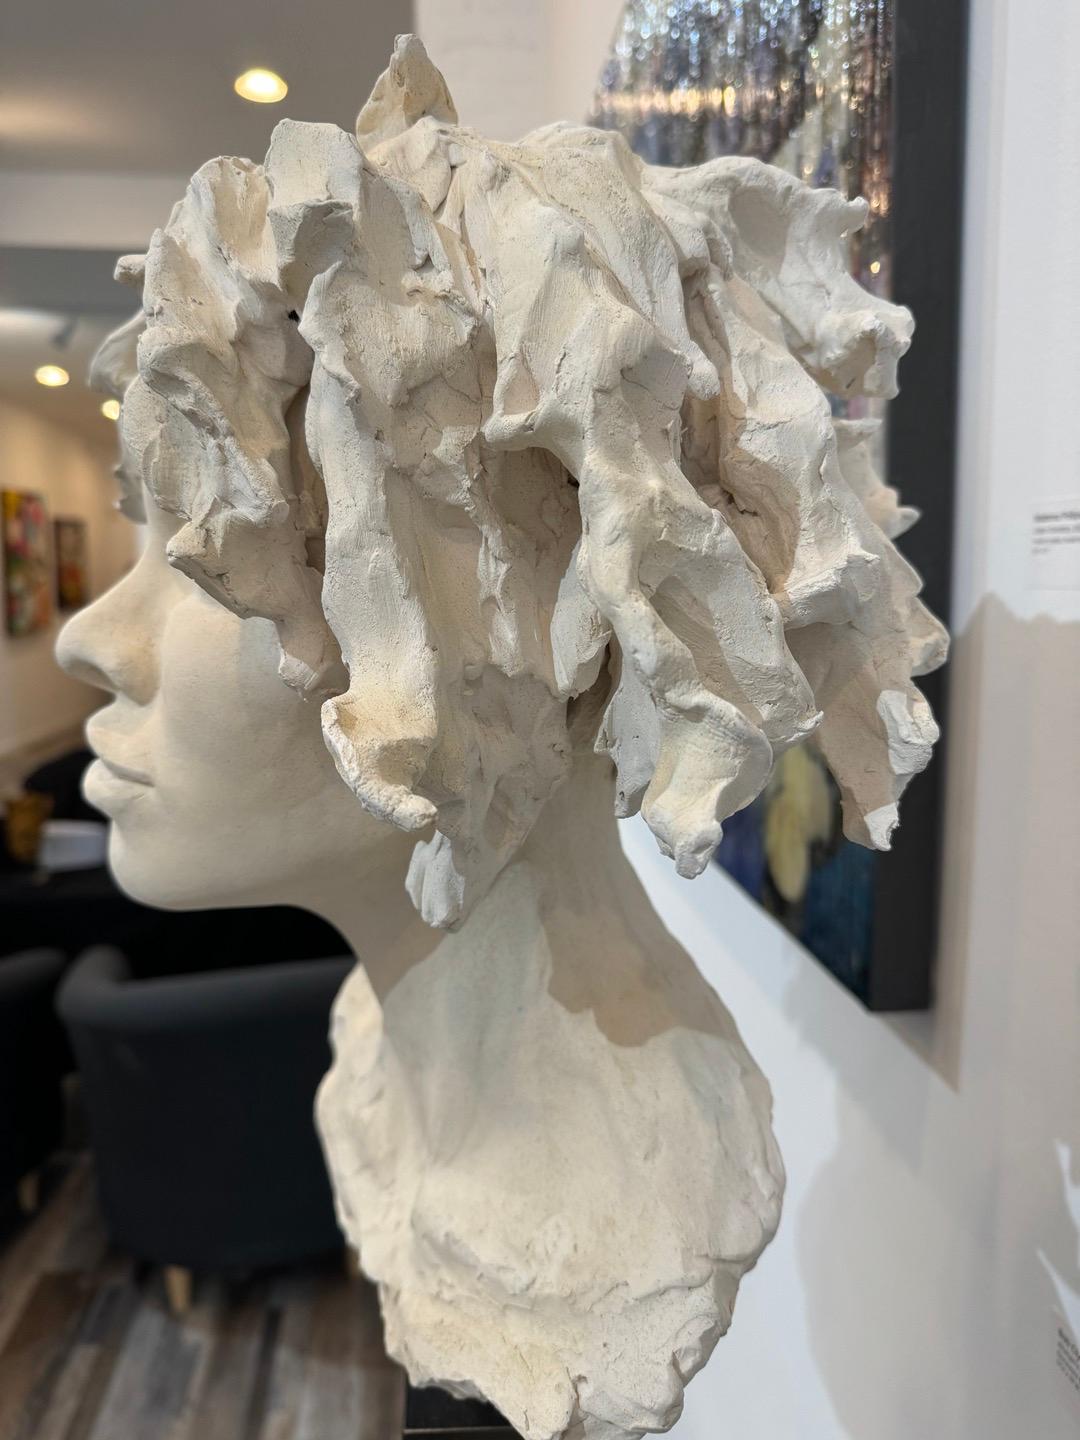 In my effort to make the sculpted bust a viable contemporary art form I have tried several approaches. This over-life-size piece is an example of my current preferred approach where a ‘tightly’ modeled head and expressive face is coupled with a